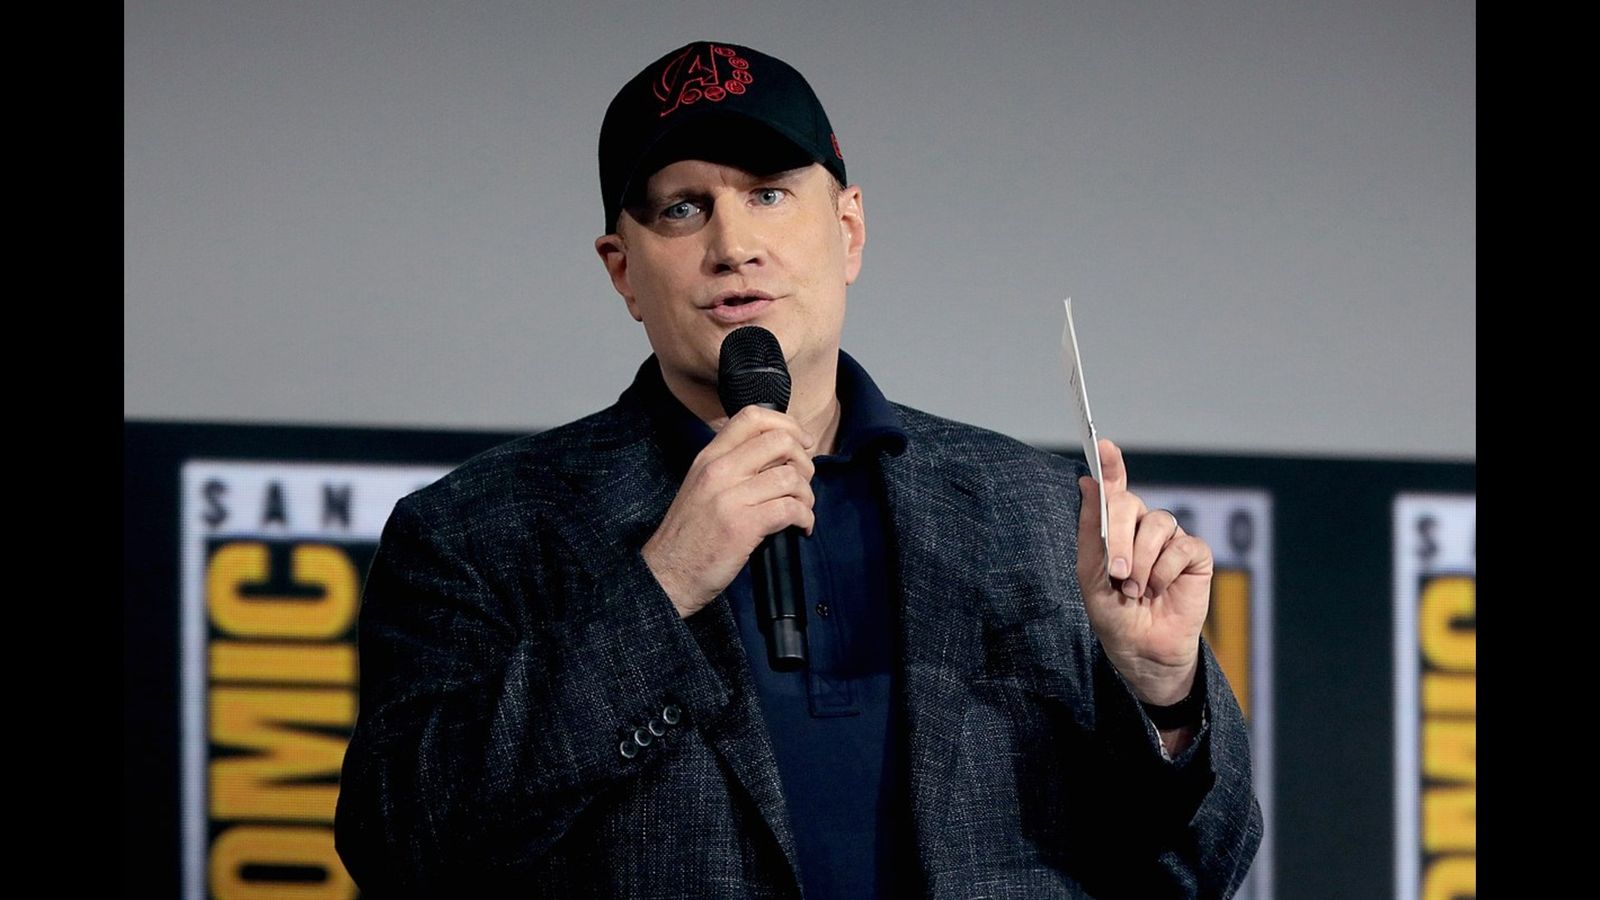 Kevin Feige speaking at the 2019 San Diego Comic Con International, for "The Eternals", at the San Diego Convention Center in San Diego, California.